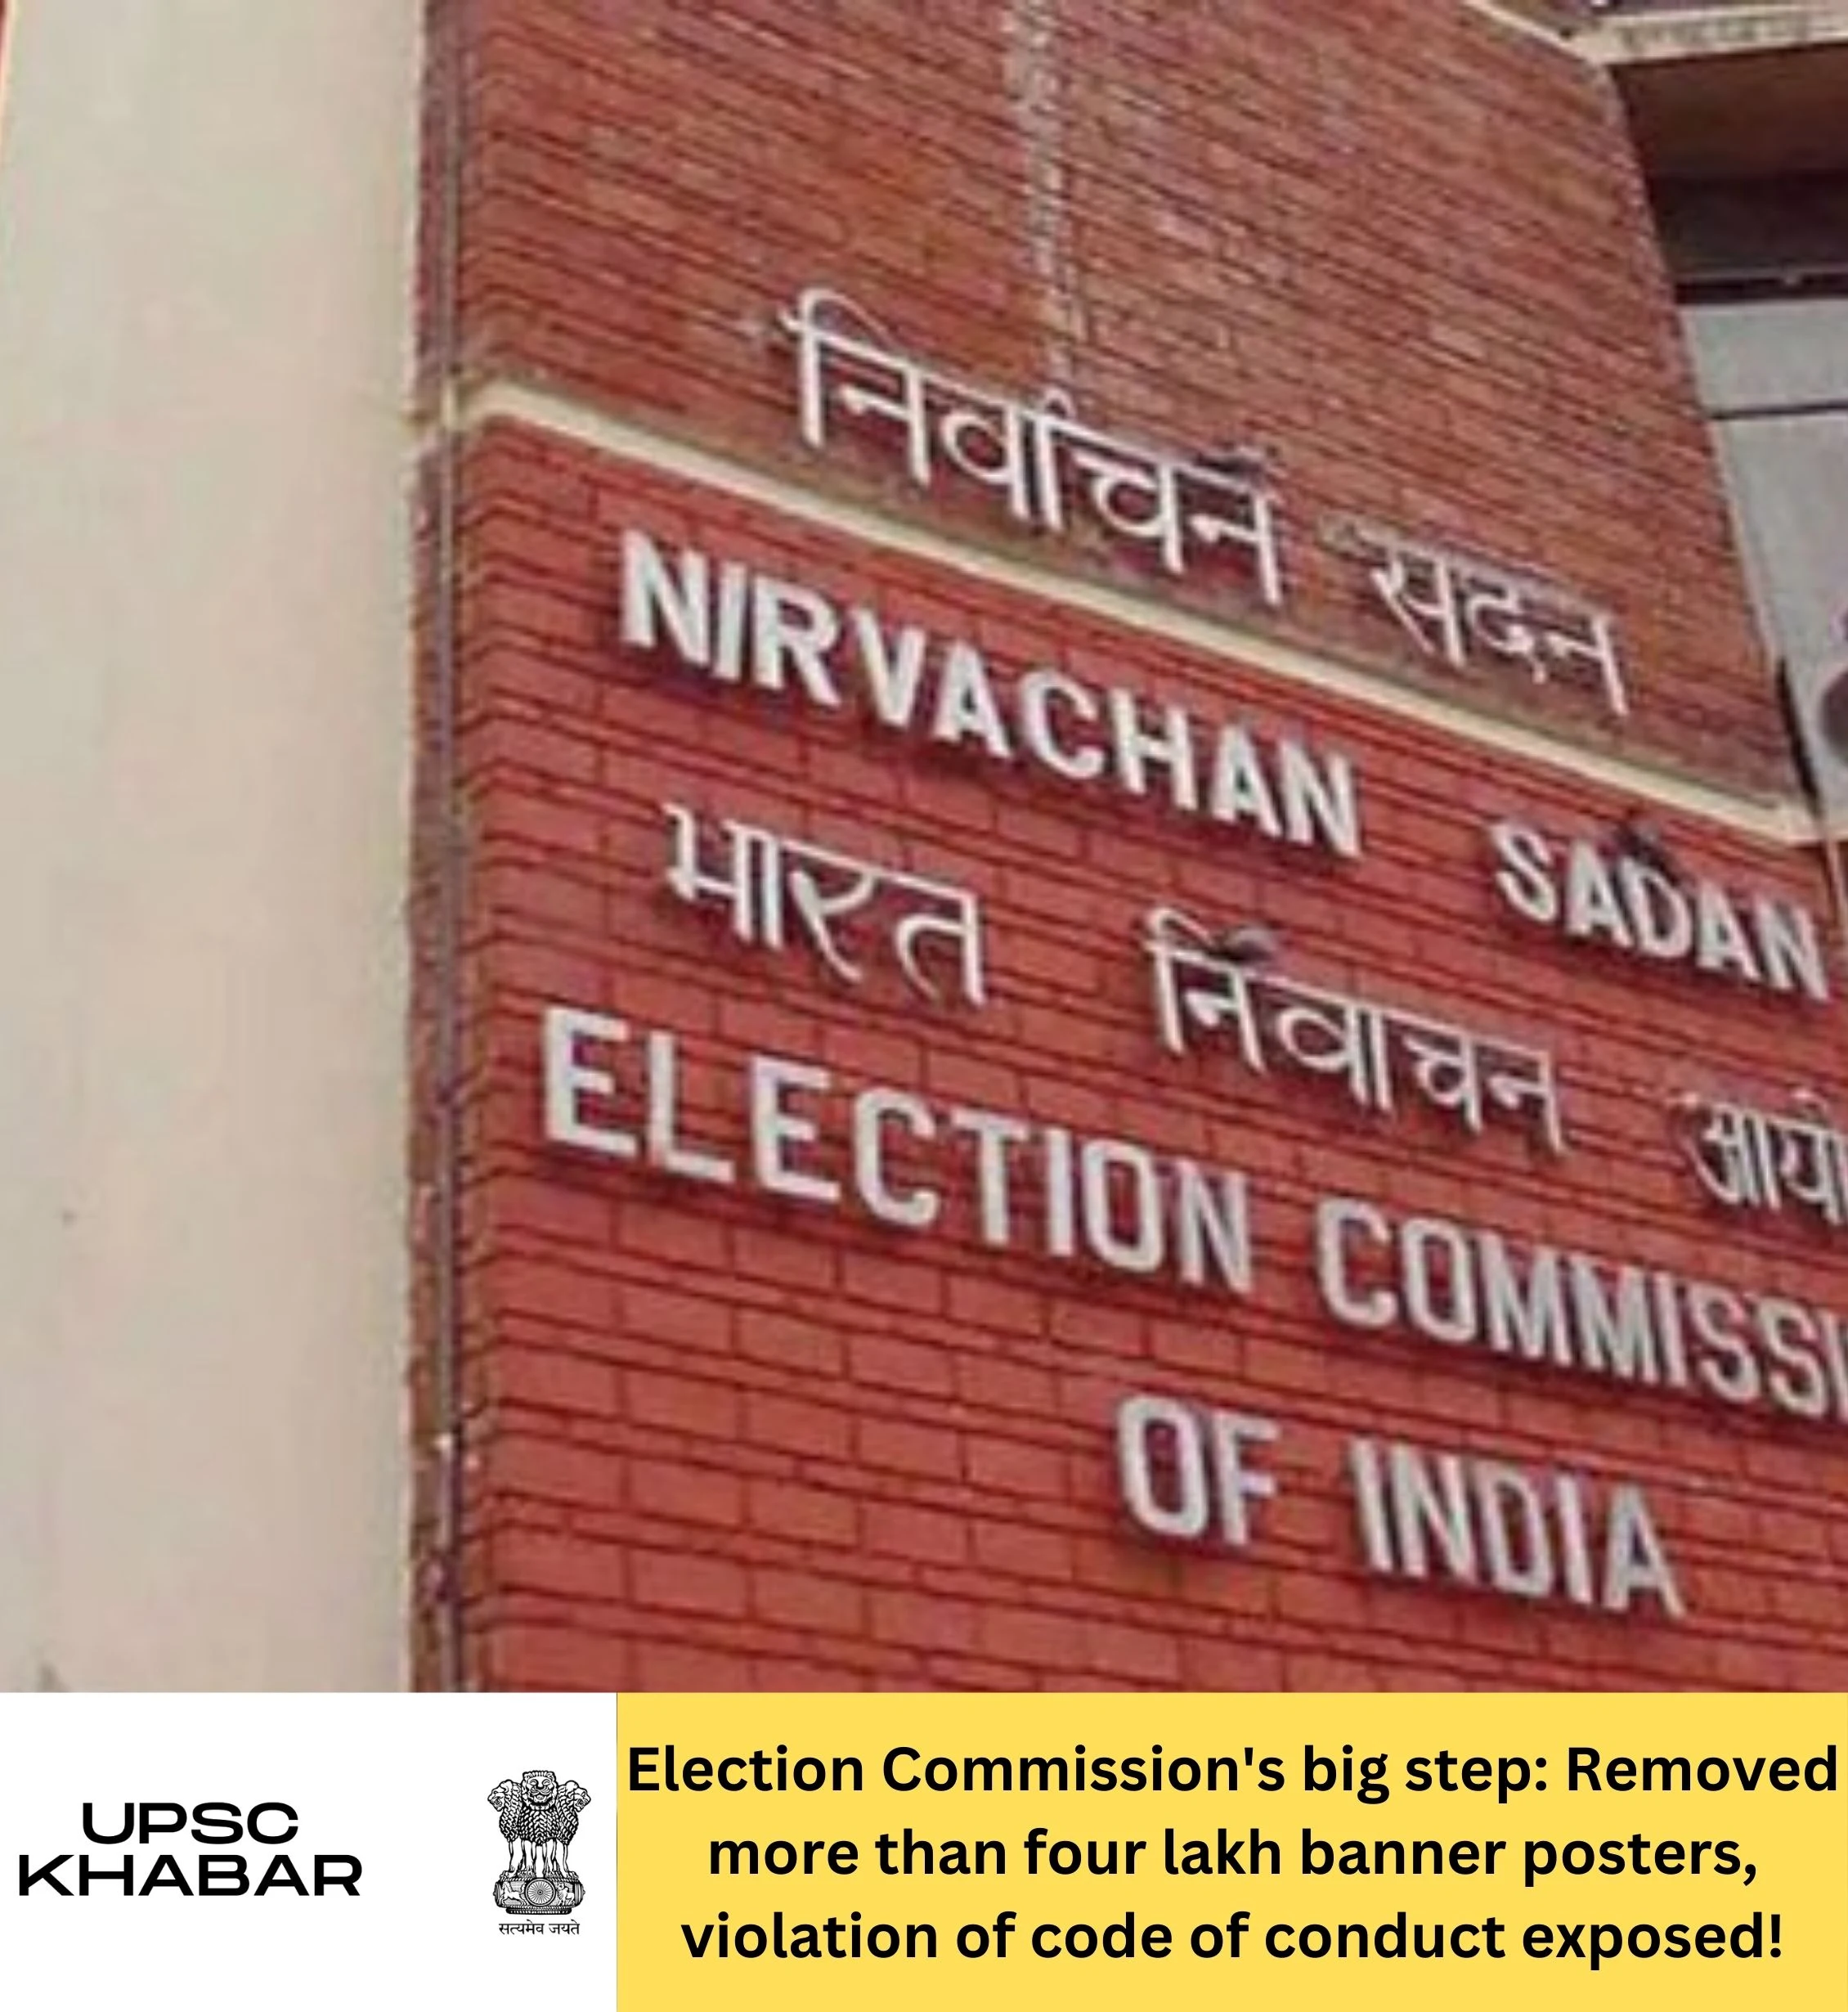 Election Commission's big step: Removed more than four lakh banner posters, violation of code of conduct exposed!